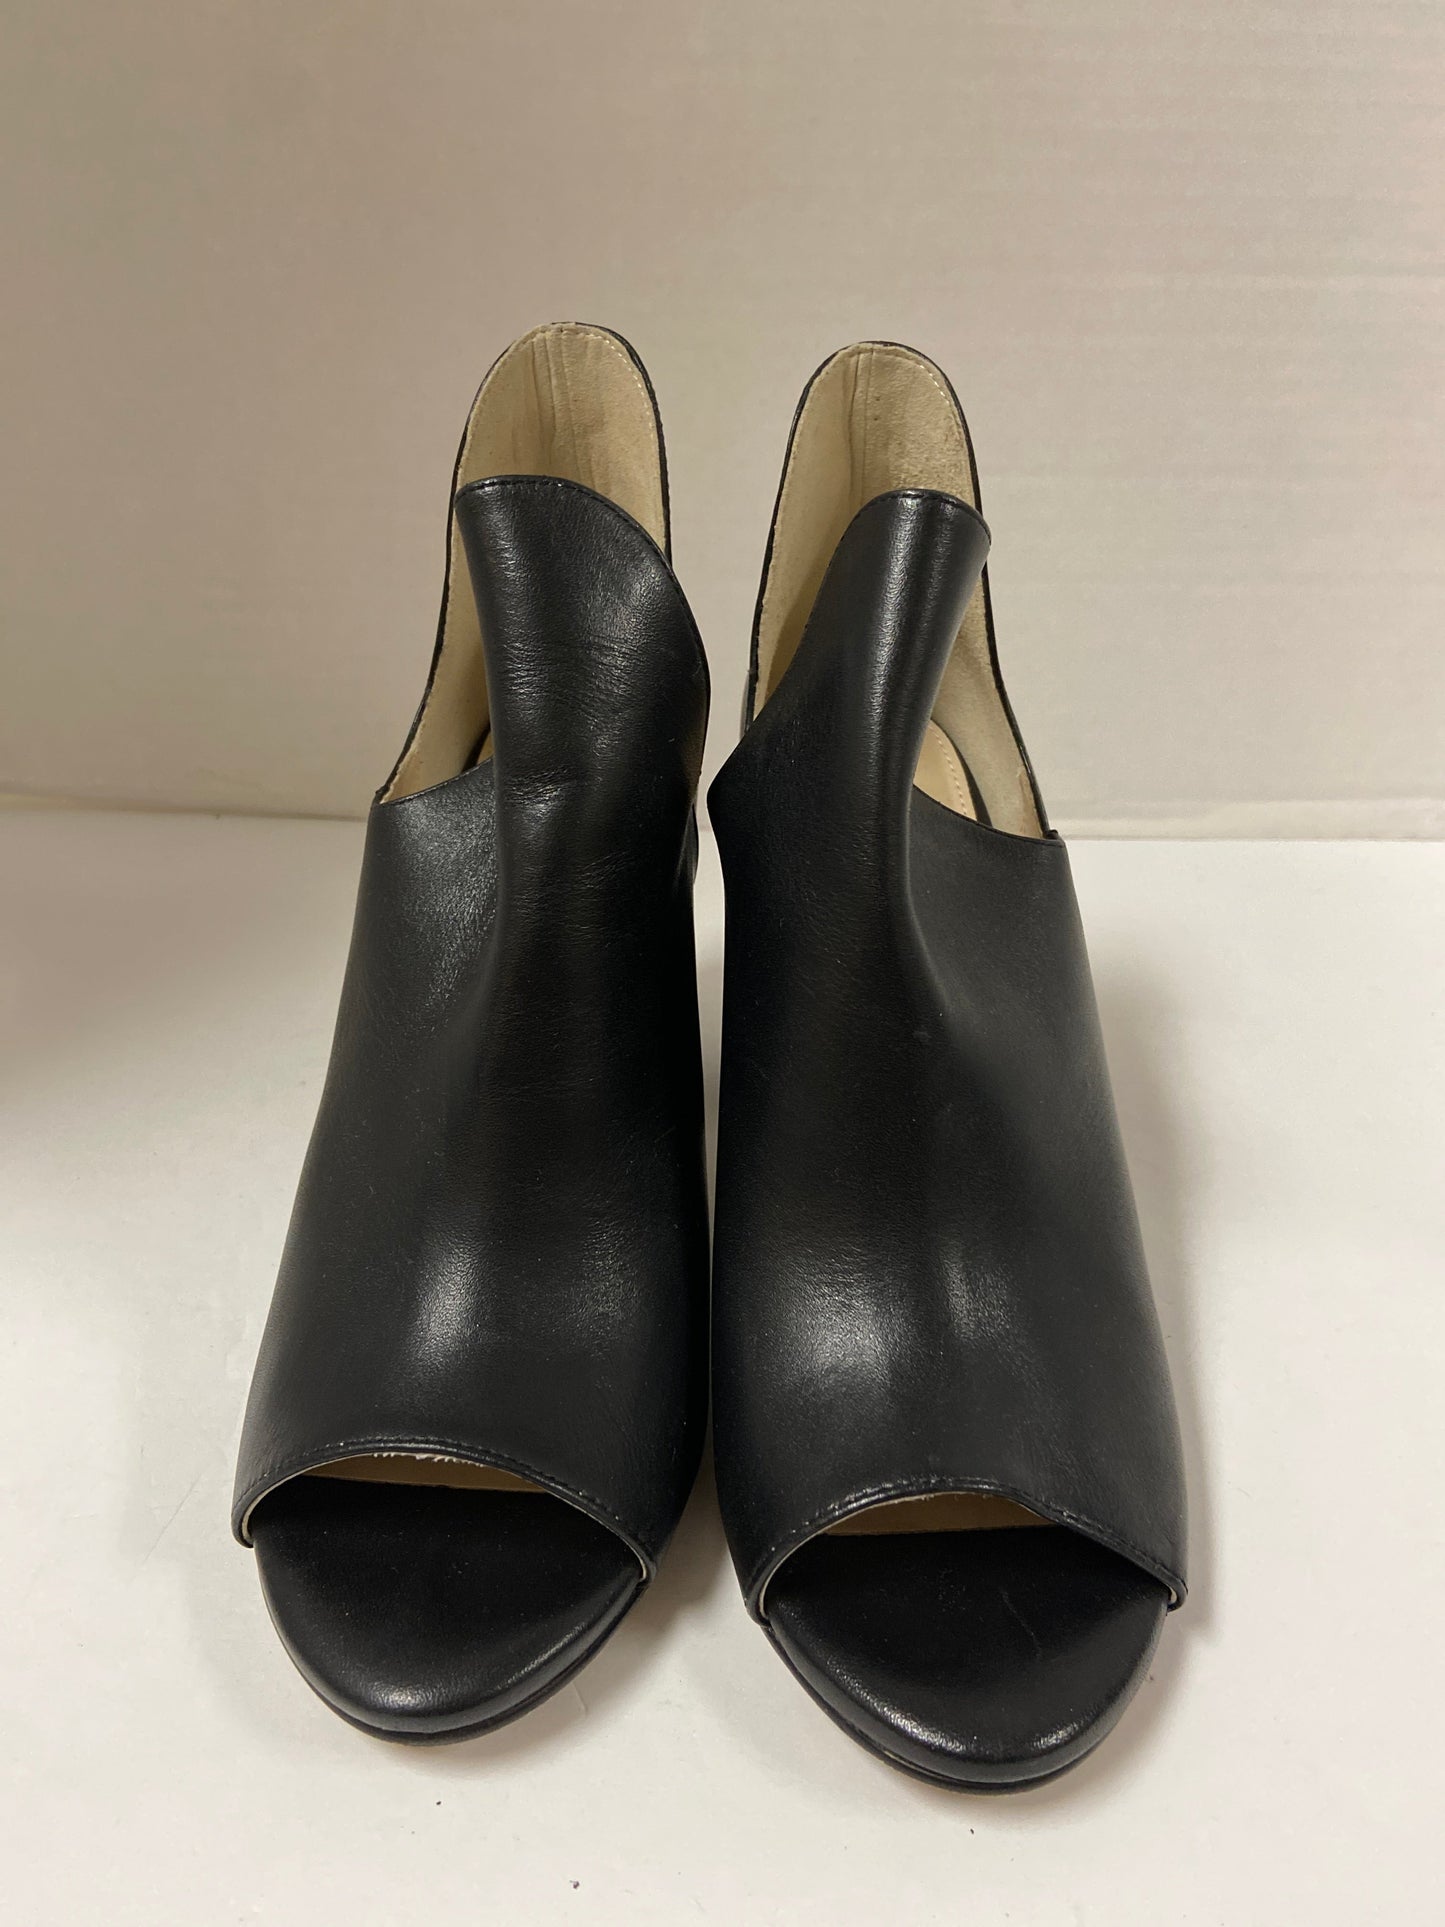 Sandals Heels Block By Cole-haan O  Size: 6.5